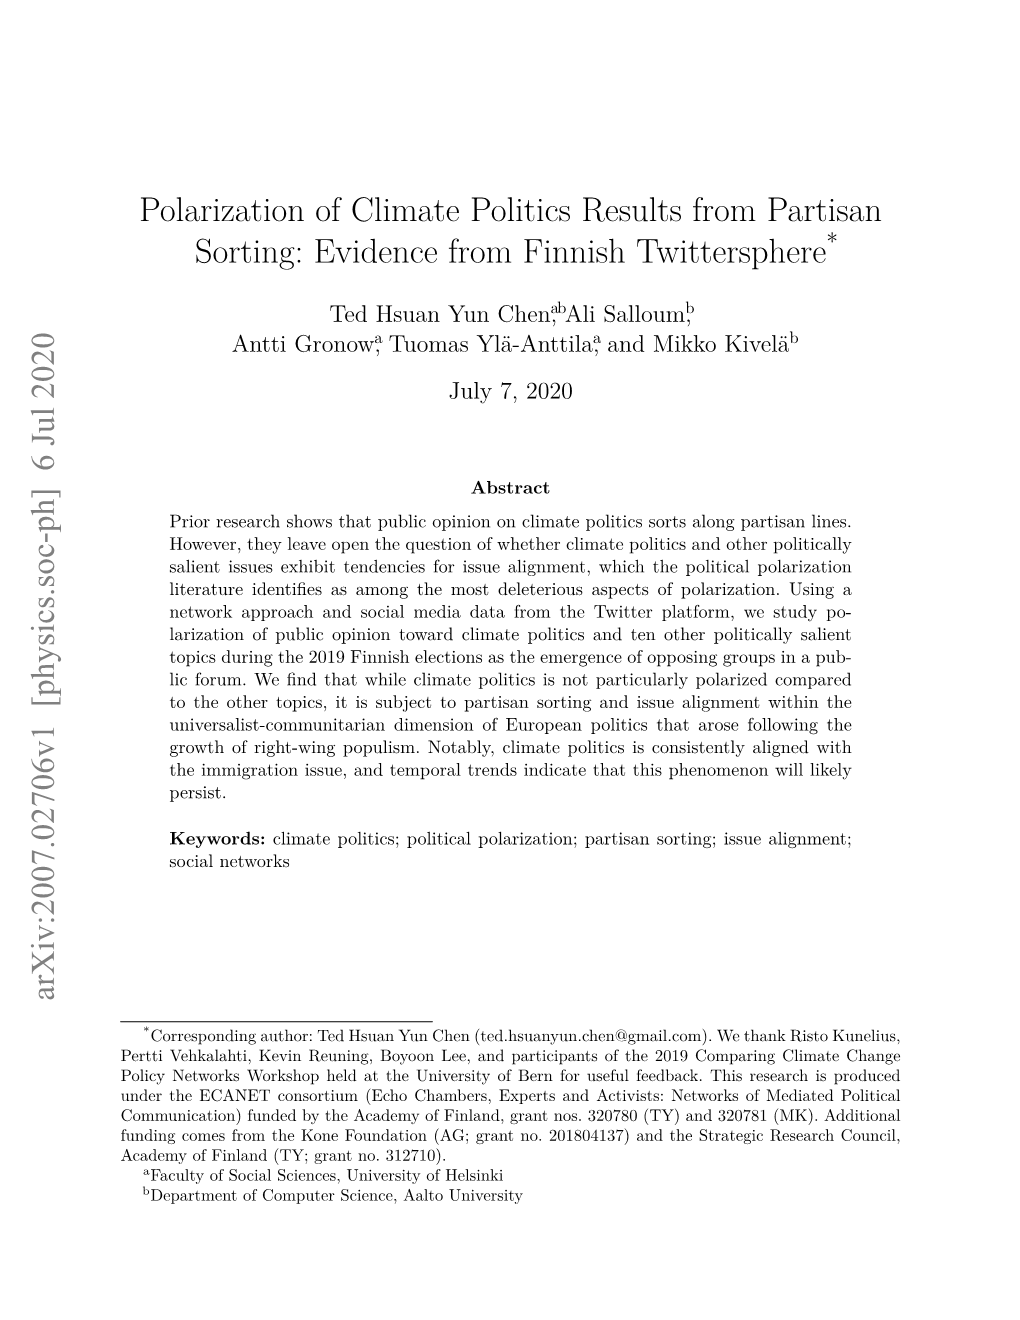 Polarization of Climate Politics Results from Partisan Sorting: Evidence from Finnish Twittersphere Arxiv:2007.02706V1 [Physics